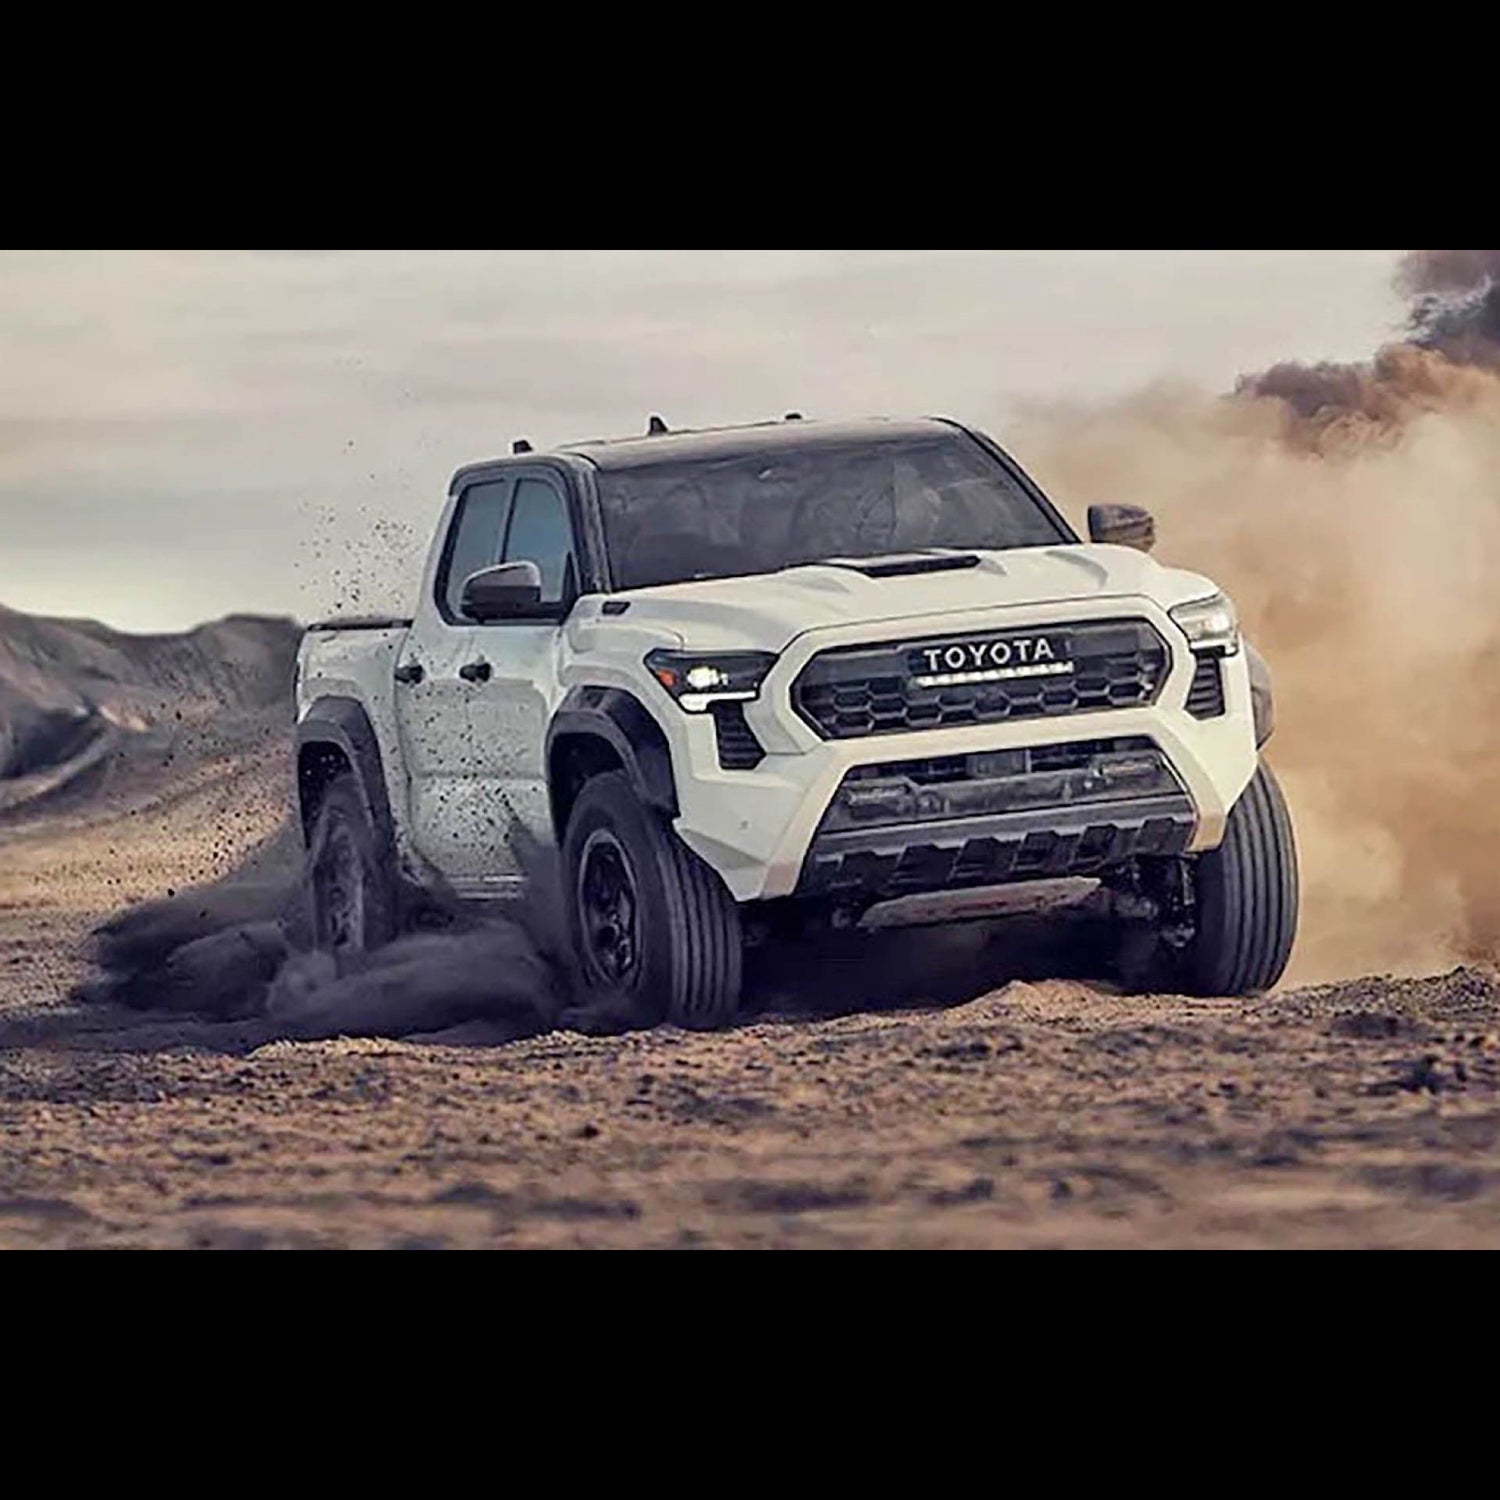 White Toyota Tacoma TRD spinning tires in the dirt